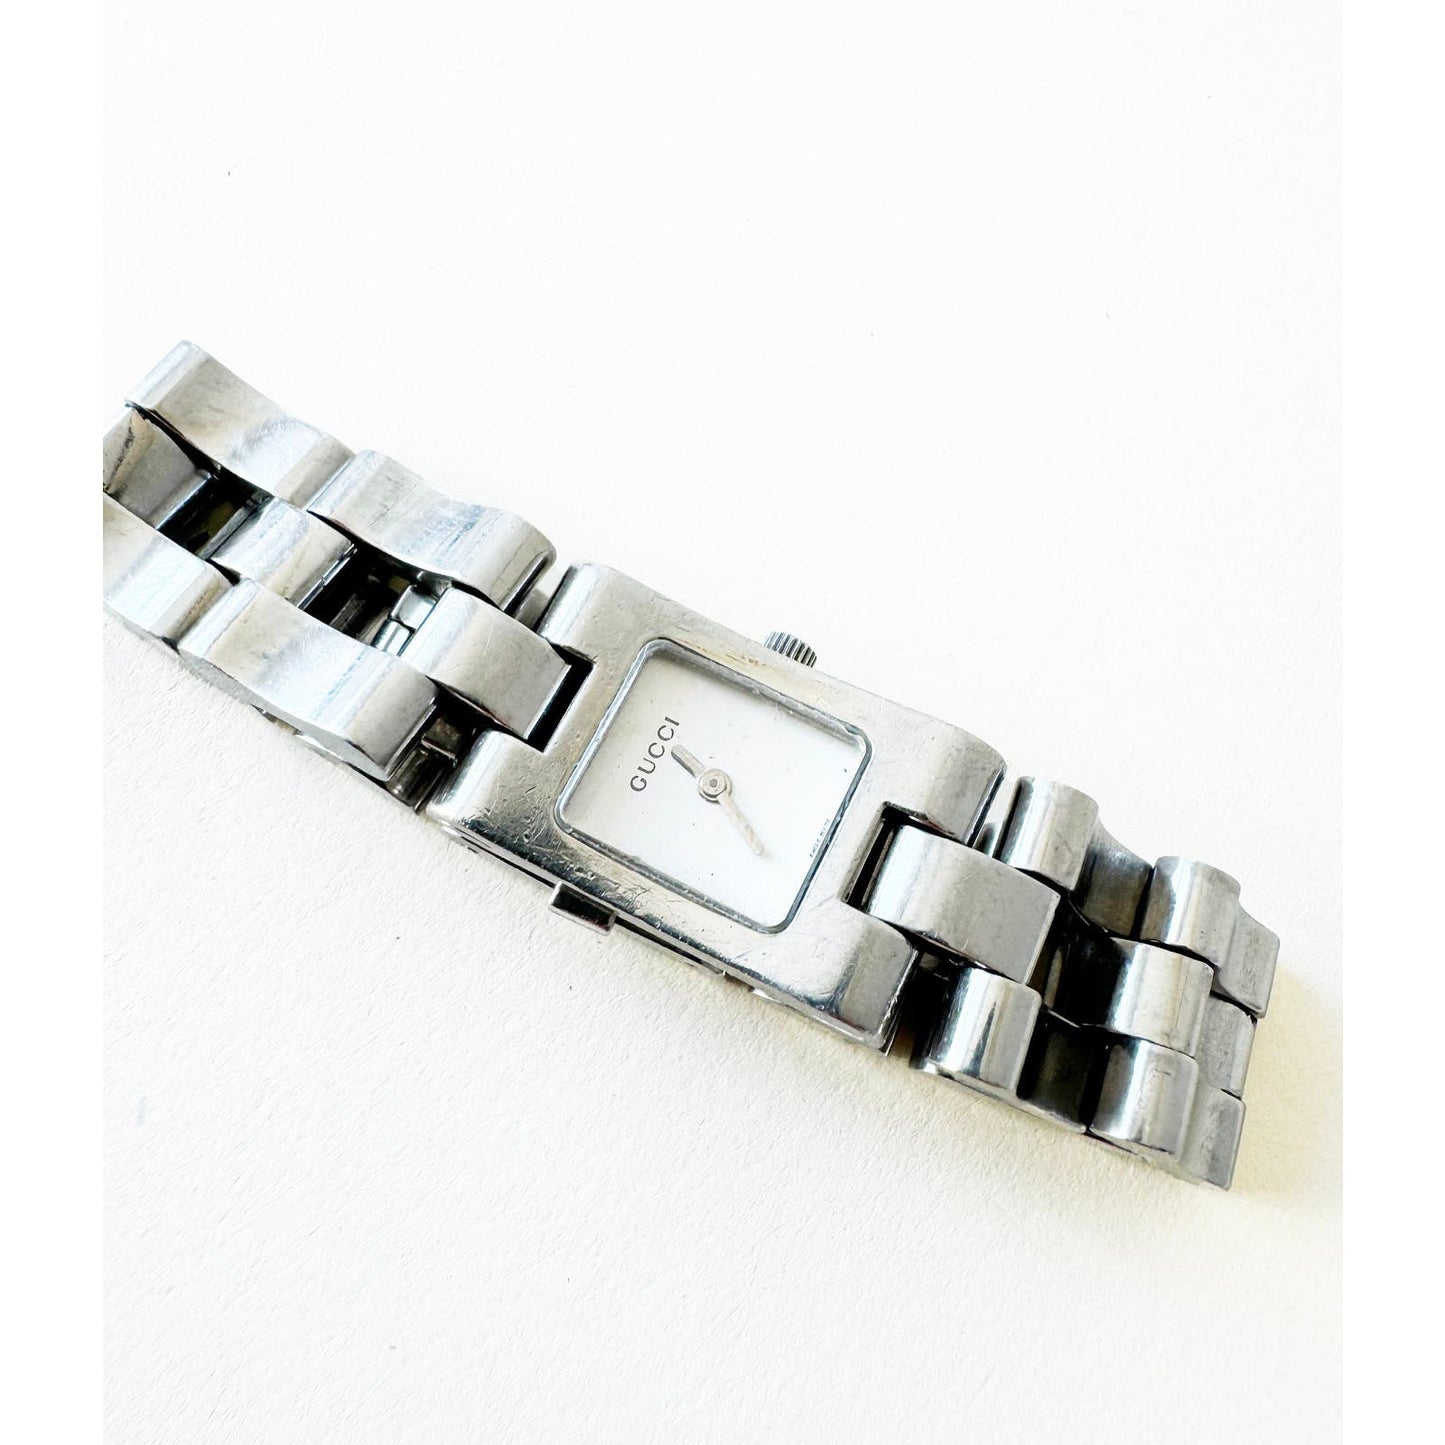 Vintage Gucci Silver Chain Bracelet Watch with Square Face